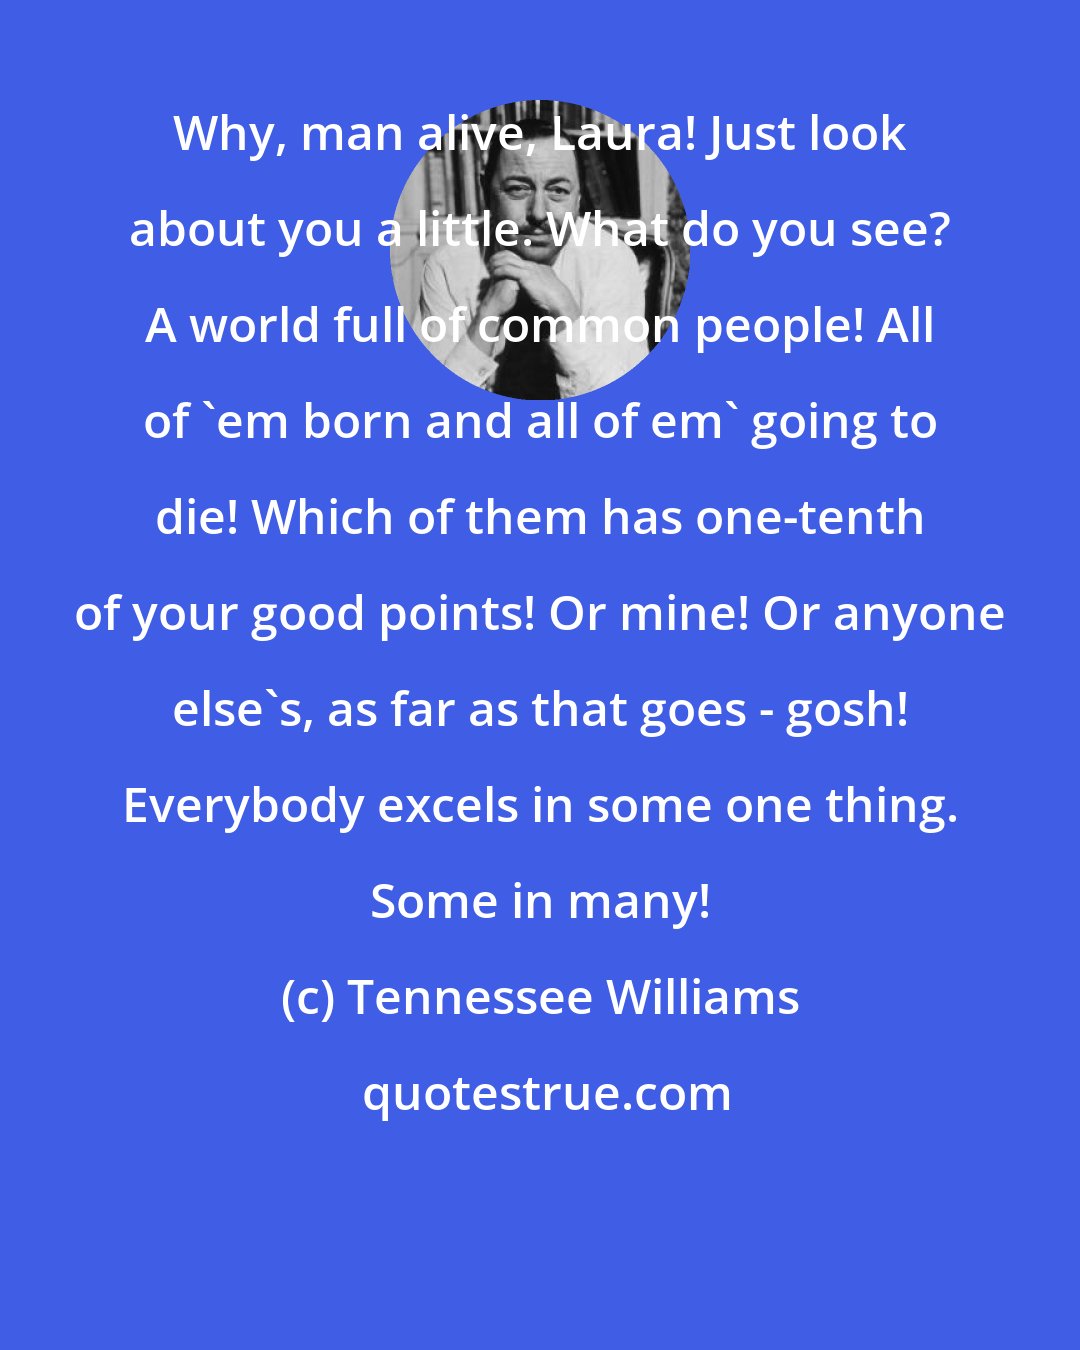 Tennessee Williams: Why, man alive, Laura! Just look about you a little. What do you see? A world full of common people! All of 'em born and all of em' going to die! Which of them has one-tenth of your good points! Or mine! Or anyone else's, as far as that goes - gosh! Everybody excels in some one thing. Some in many!